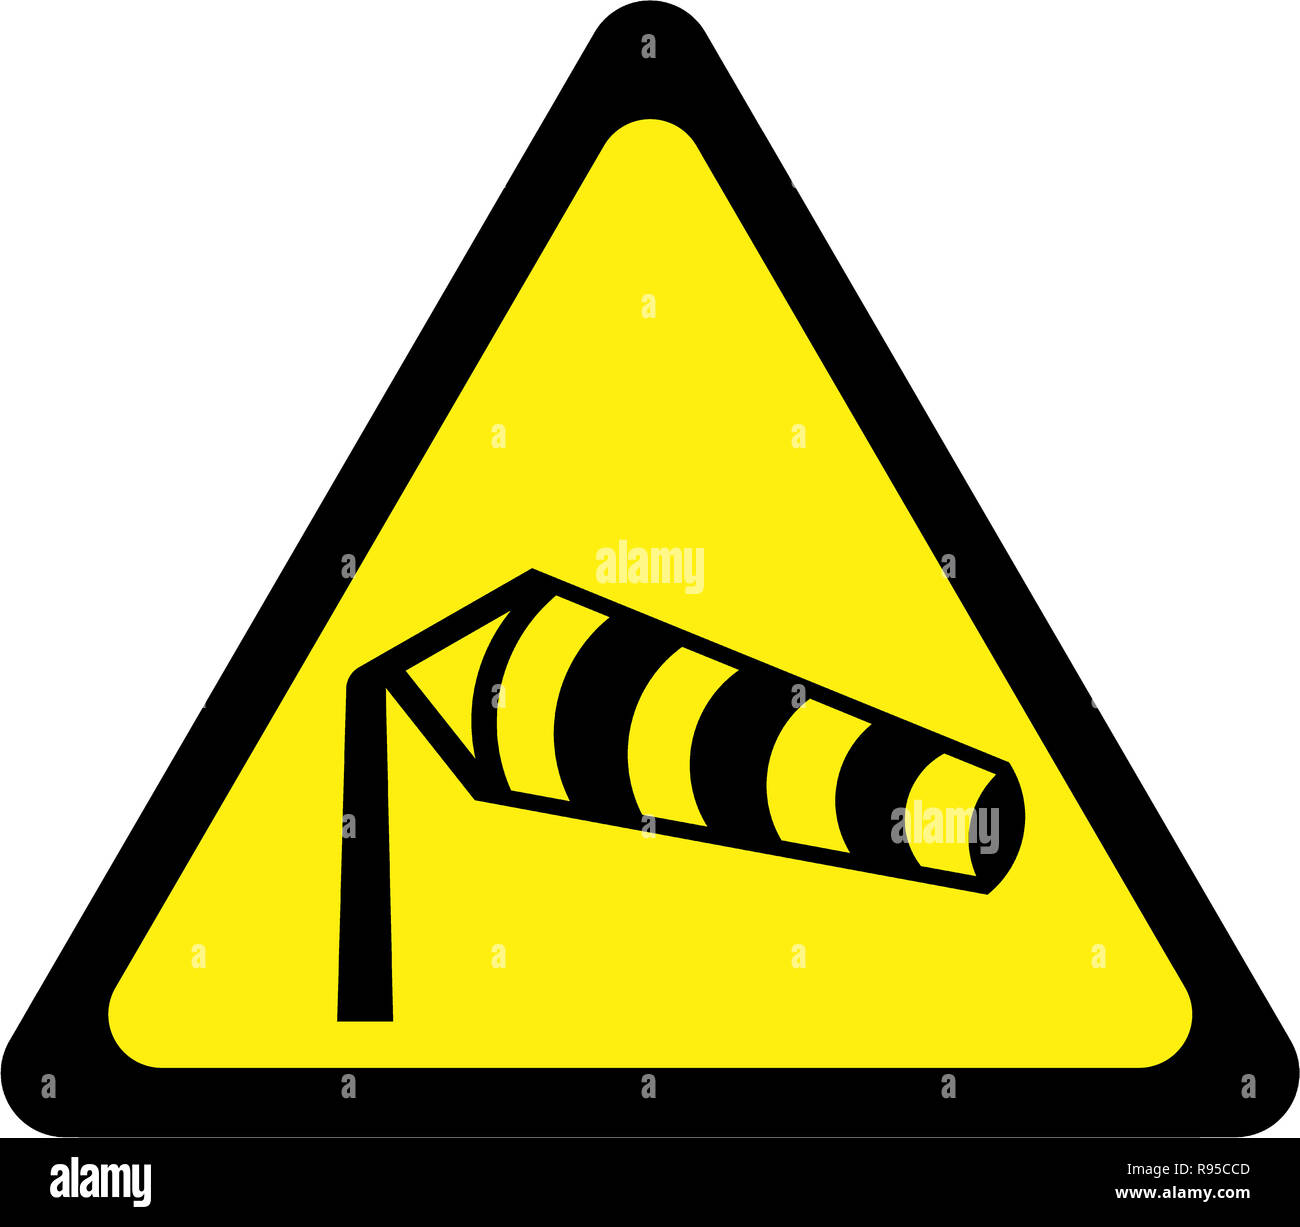 Warning sign with crosswinds symbol Stock Photo